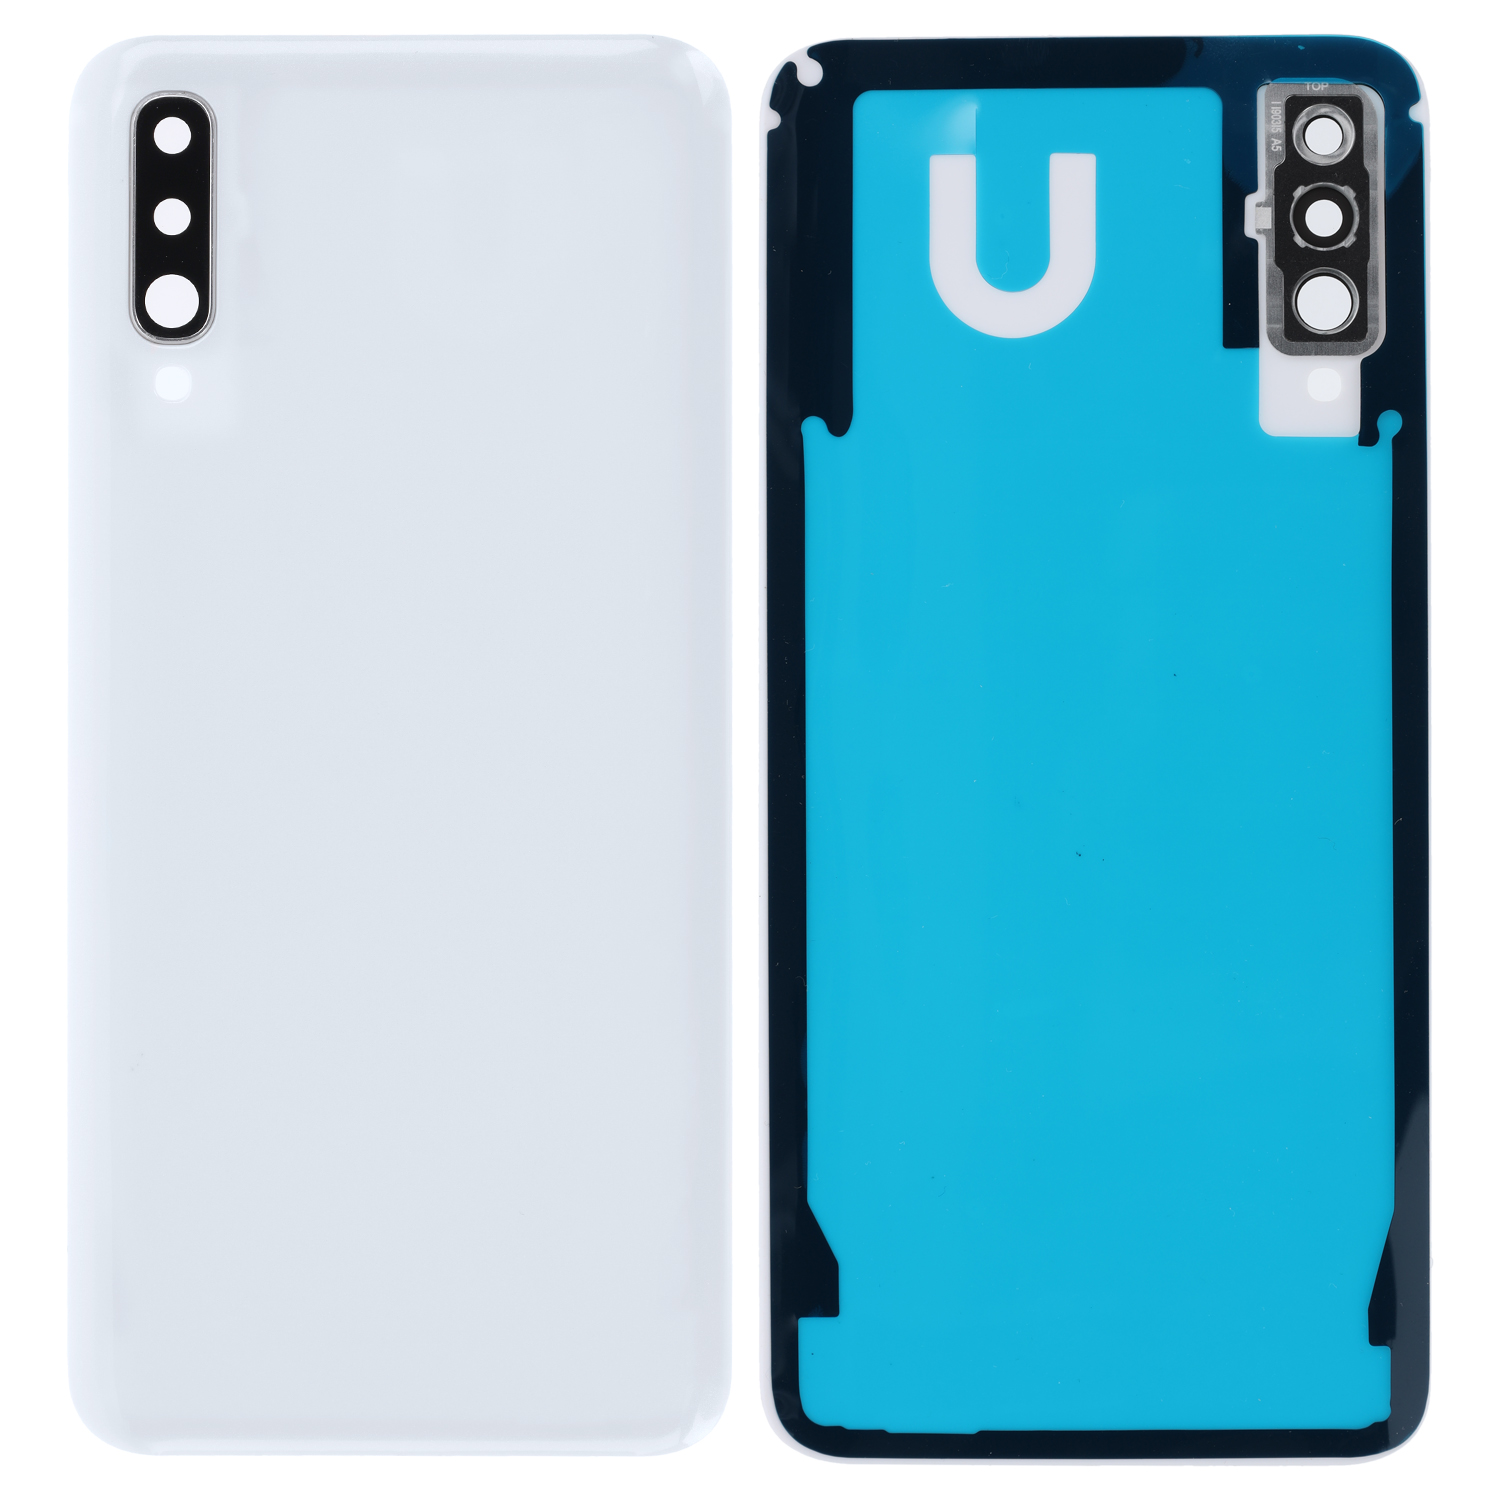 Battery Cover compatible to Samsung Galaxy A50 (A505F), White